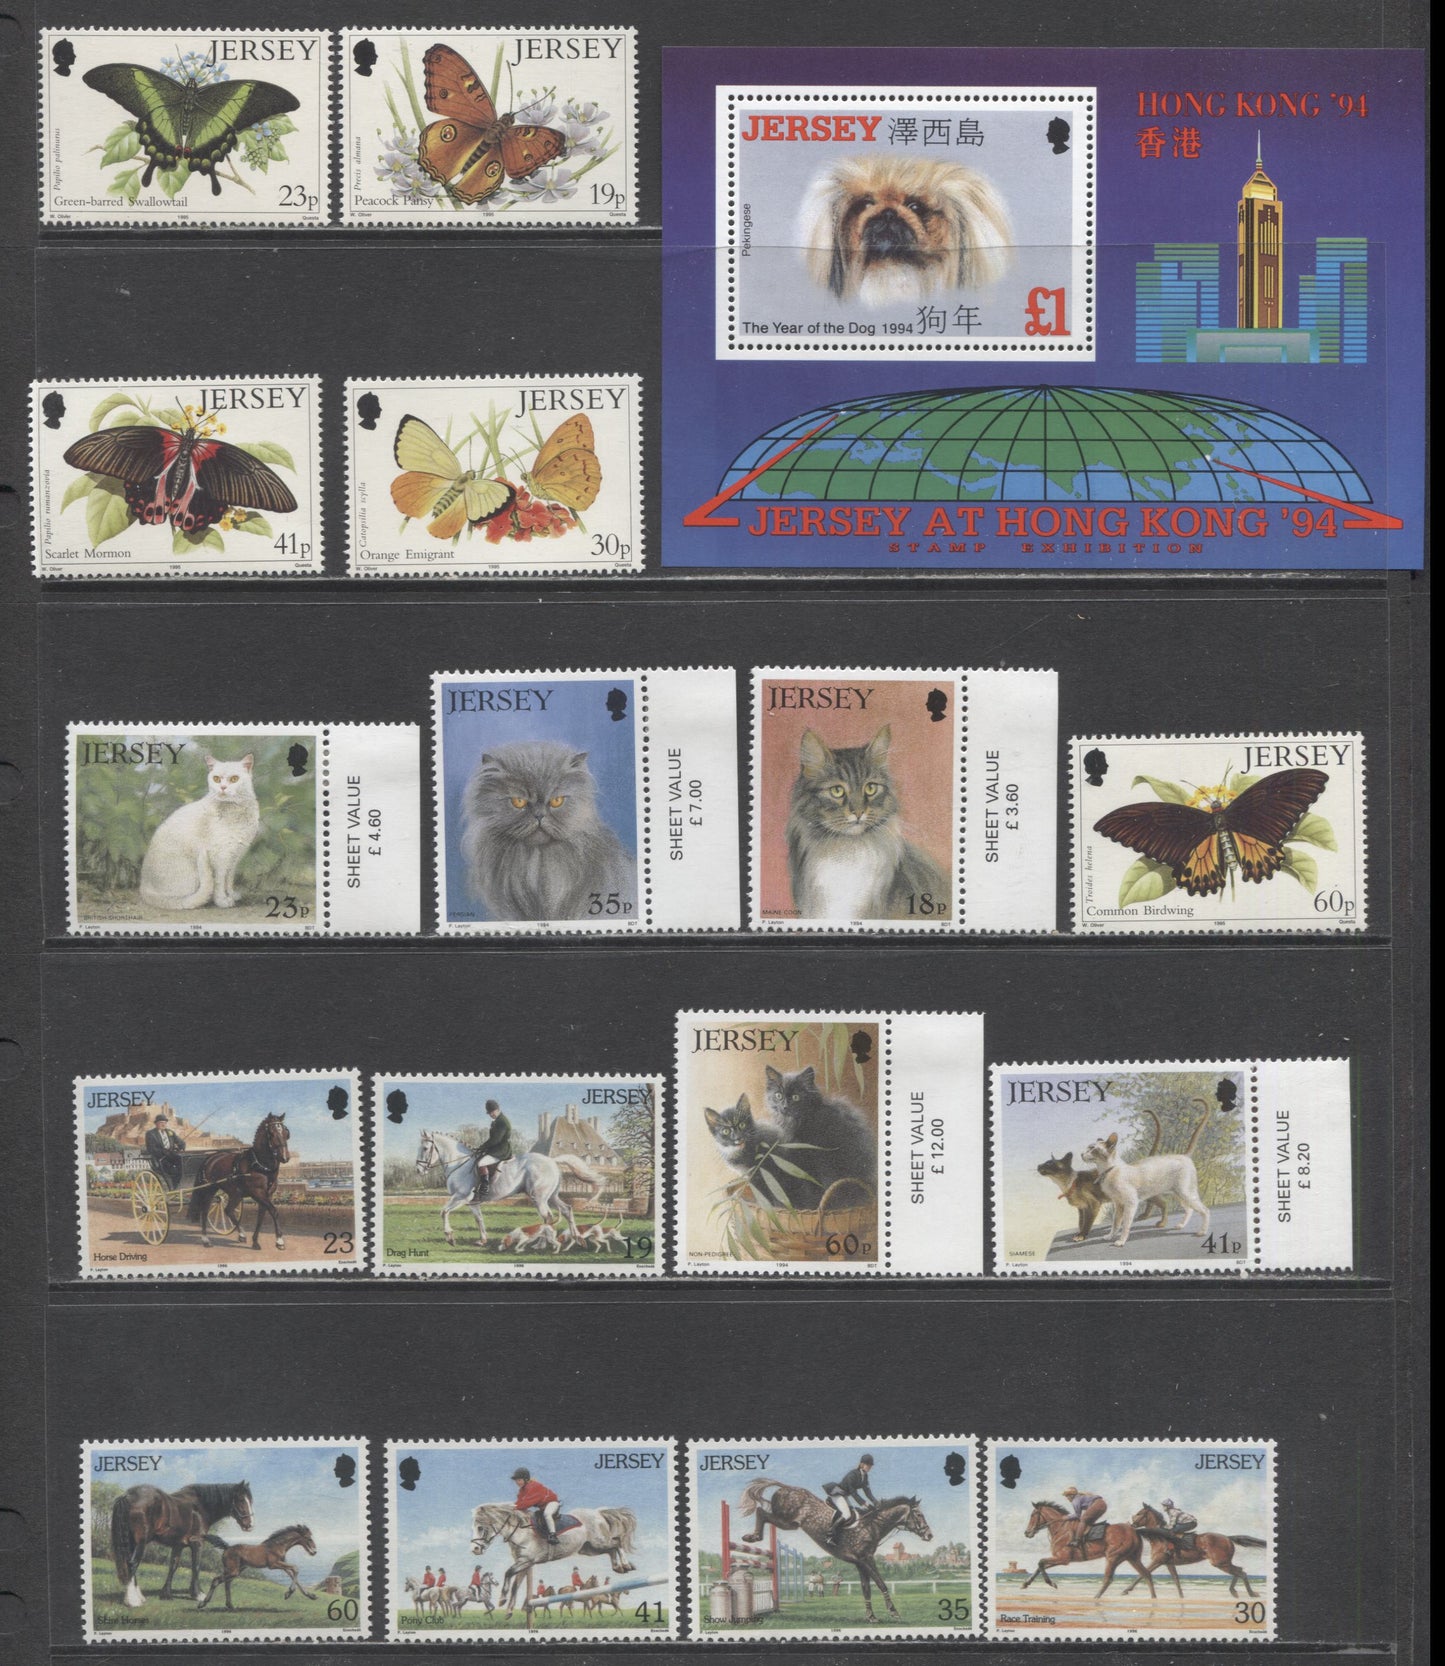 Lot 37 Great Britain - Jersey SC#660/731 1994-1996 Year Of The Dog, Cats, Butterflies/Moths & Horses Issues, 11 VFOG/NH Singles & Souvenir Sheet, Click on Listing to See ALL Pictures, 2017 Scott Cat. $19.9